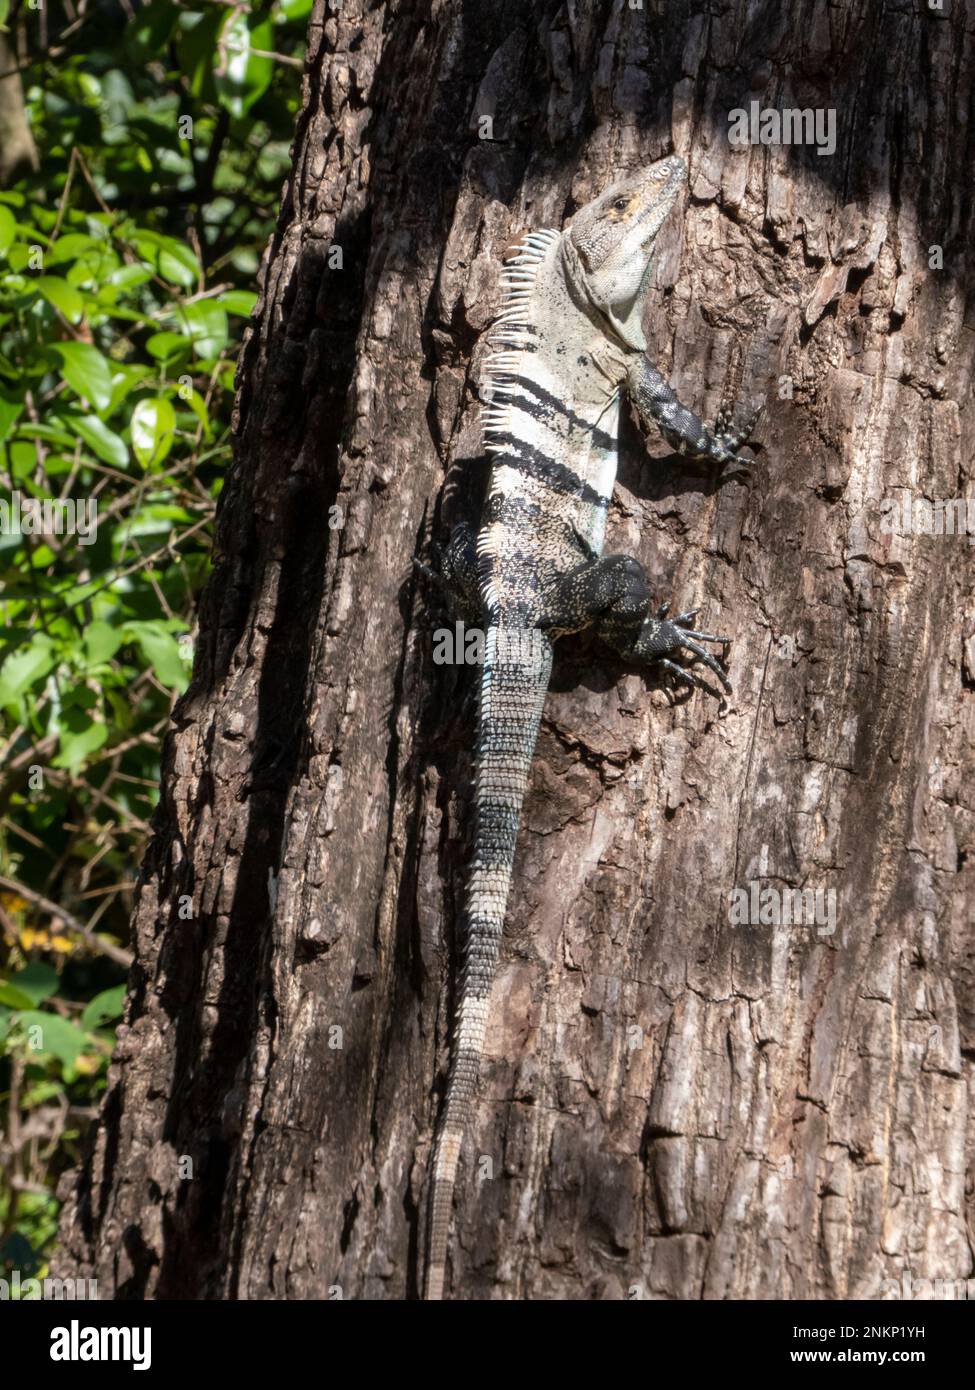 A blue iguanna basks in the sun from the trunk of a tree in Costa Rica Stock Photo